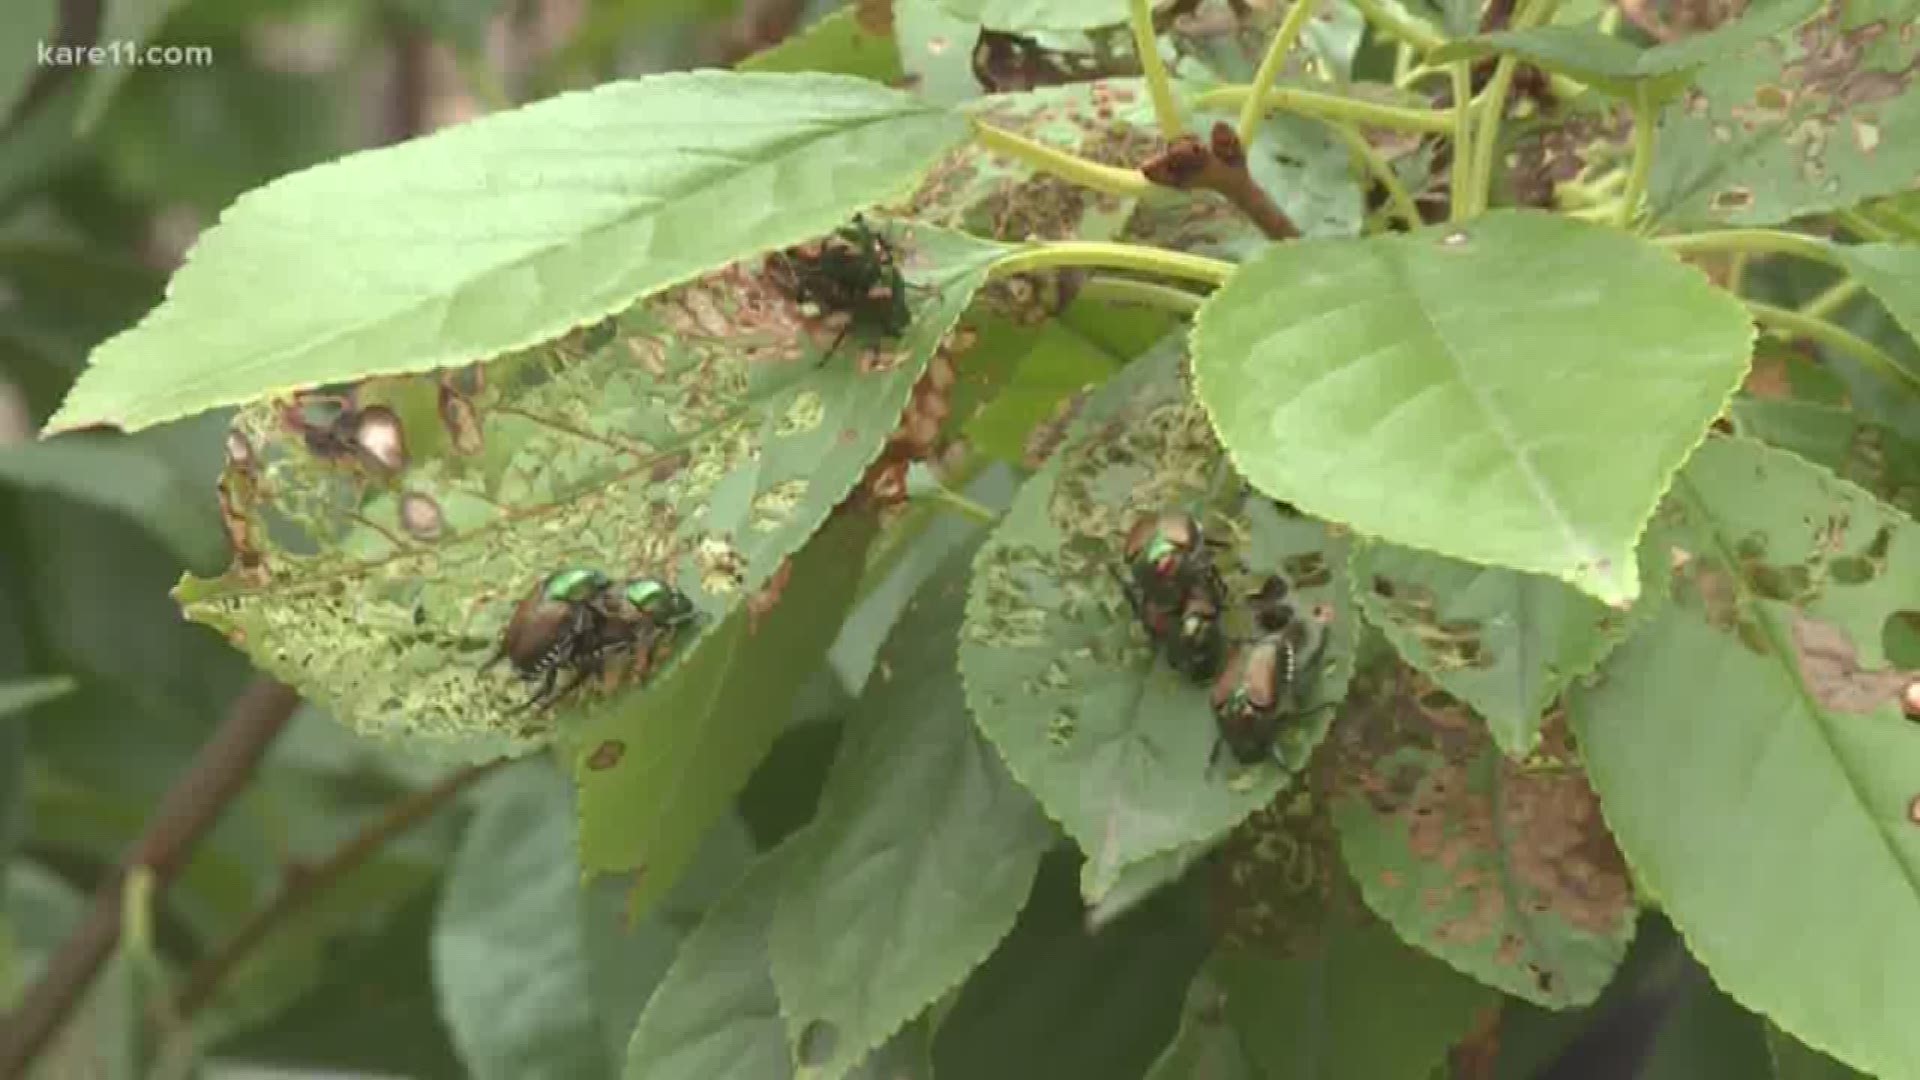 They are everywhere! They cause so much damage. This is one the best times of year to try to eradicate them from your yard. https://kare11.tv/2OpAGBi